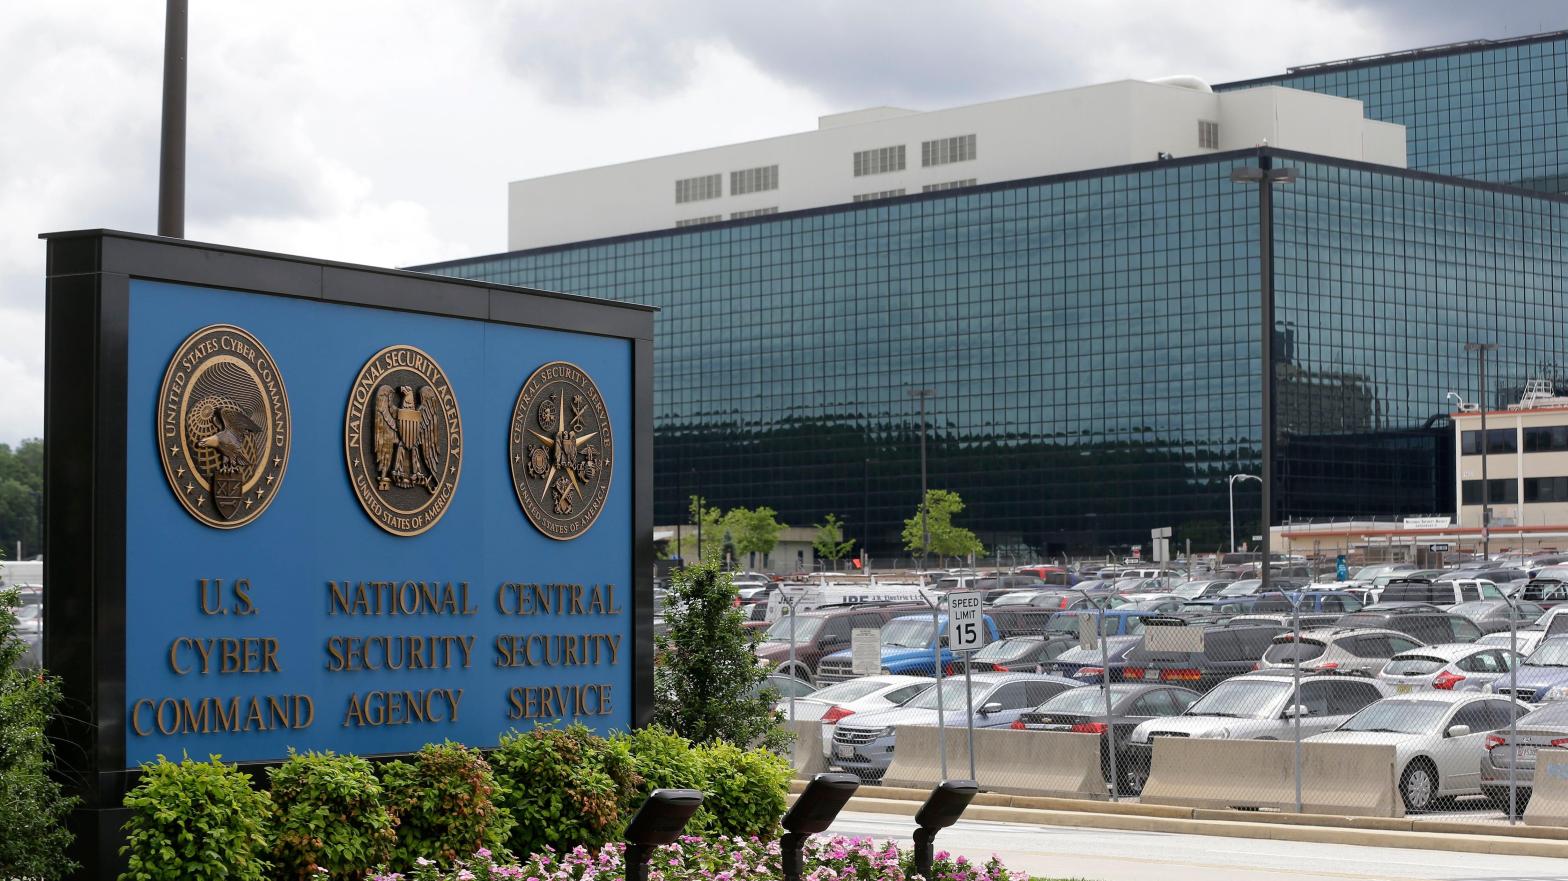 NSA Employee Gets 22 Years in Prison for Trying to Give Top Secret Info to Russia